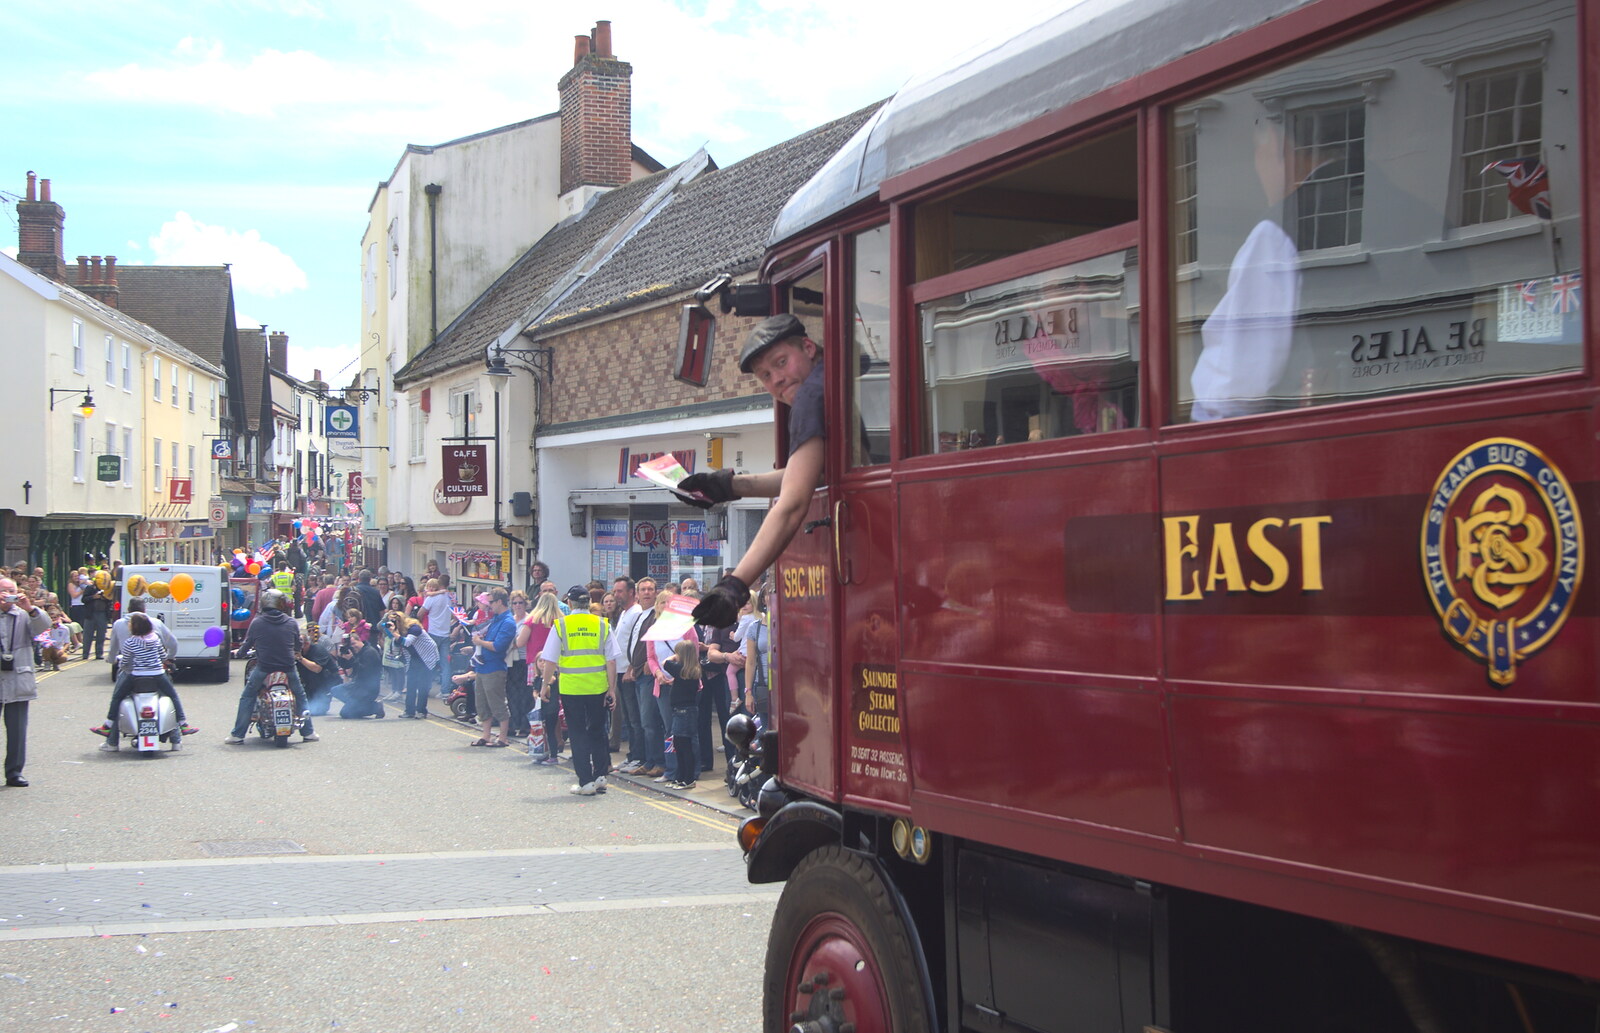 The steam bus drives through Diss from Morris Dancing and a Carnival Procession, Diss, Norfolk - 17th June 2012